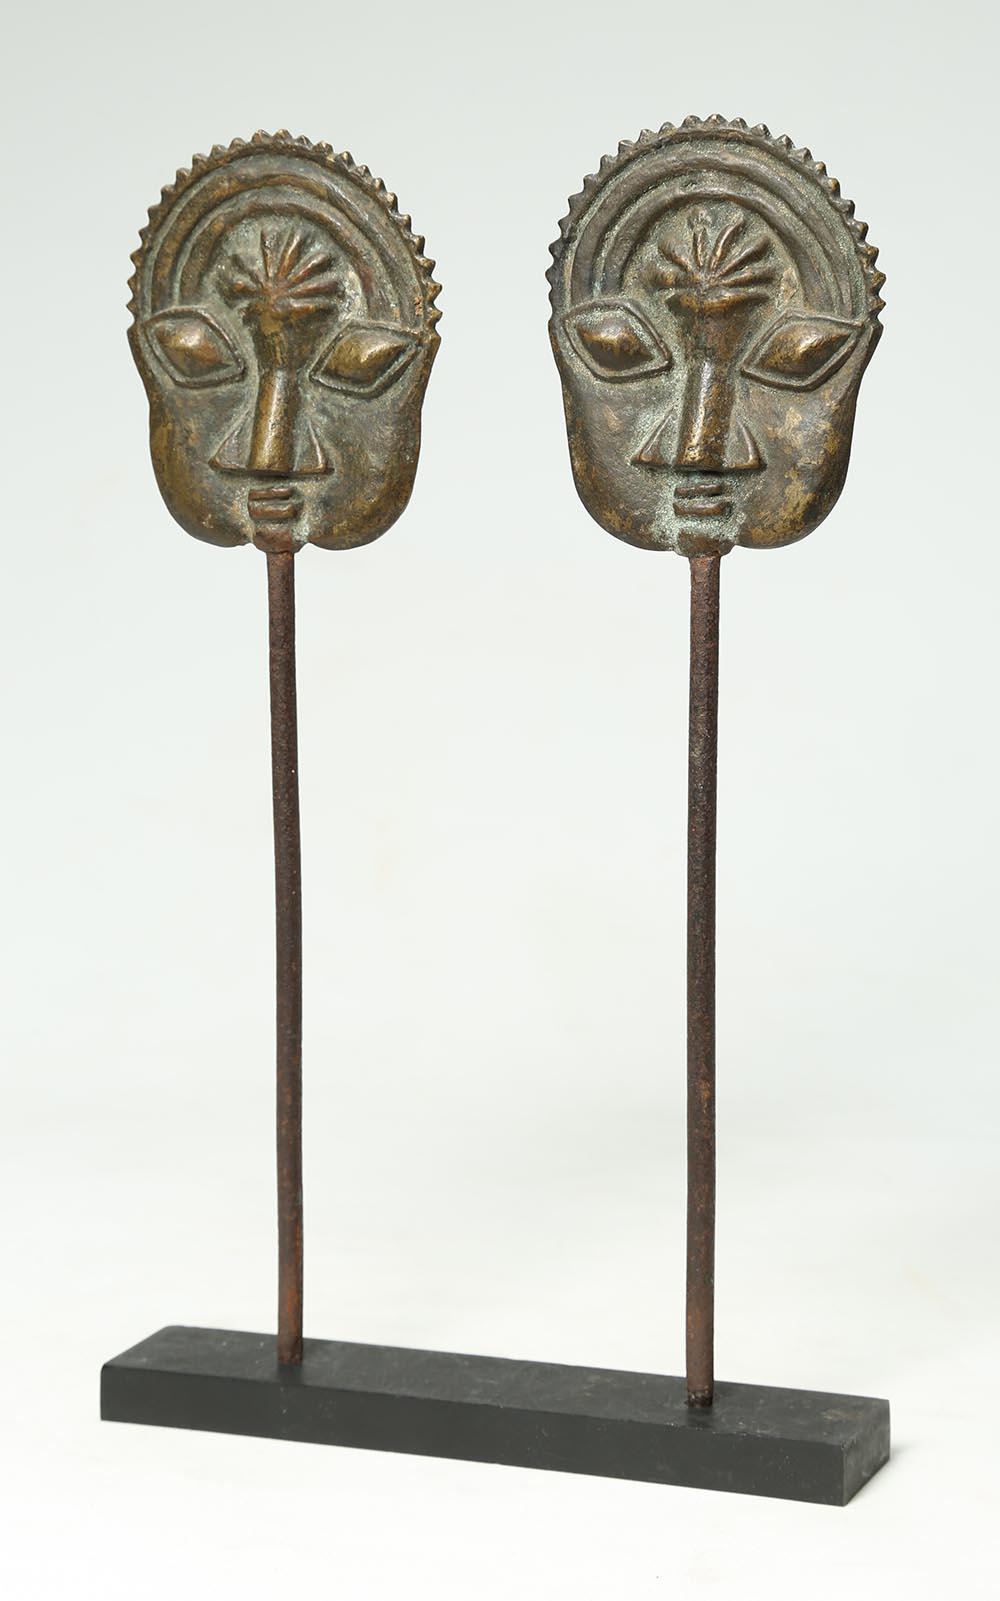 Yoruba Tribal Ogboni Pair of Brass Pins with Faces, Nigeria Early 20th Century In Good Condition For Sale In Santa Fe, NM